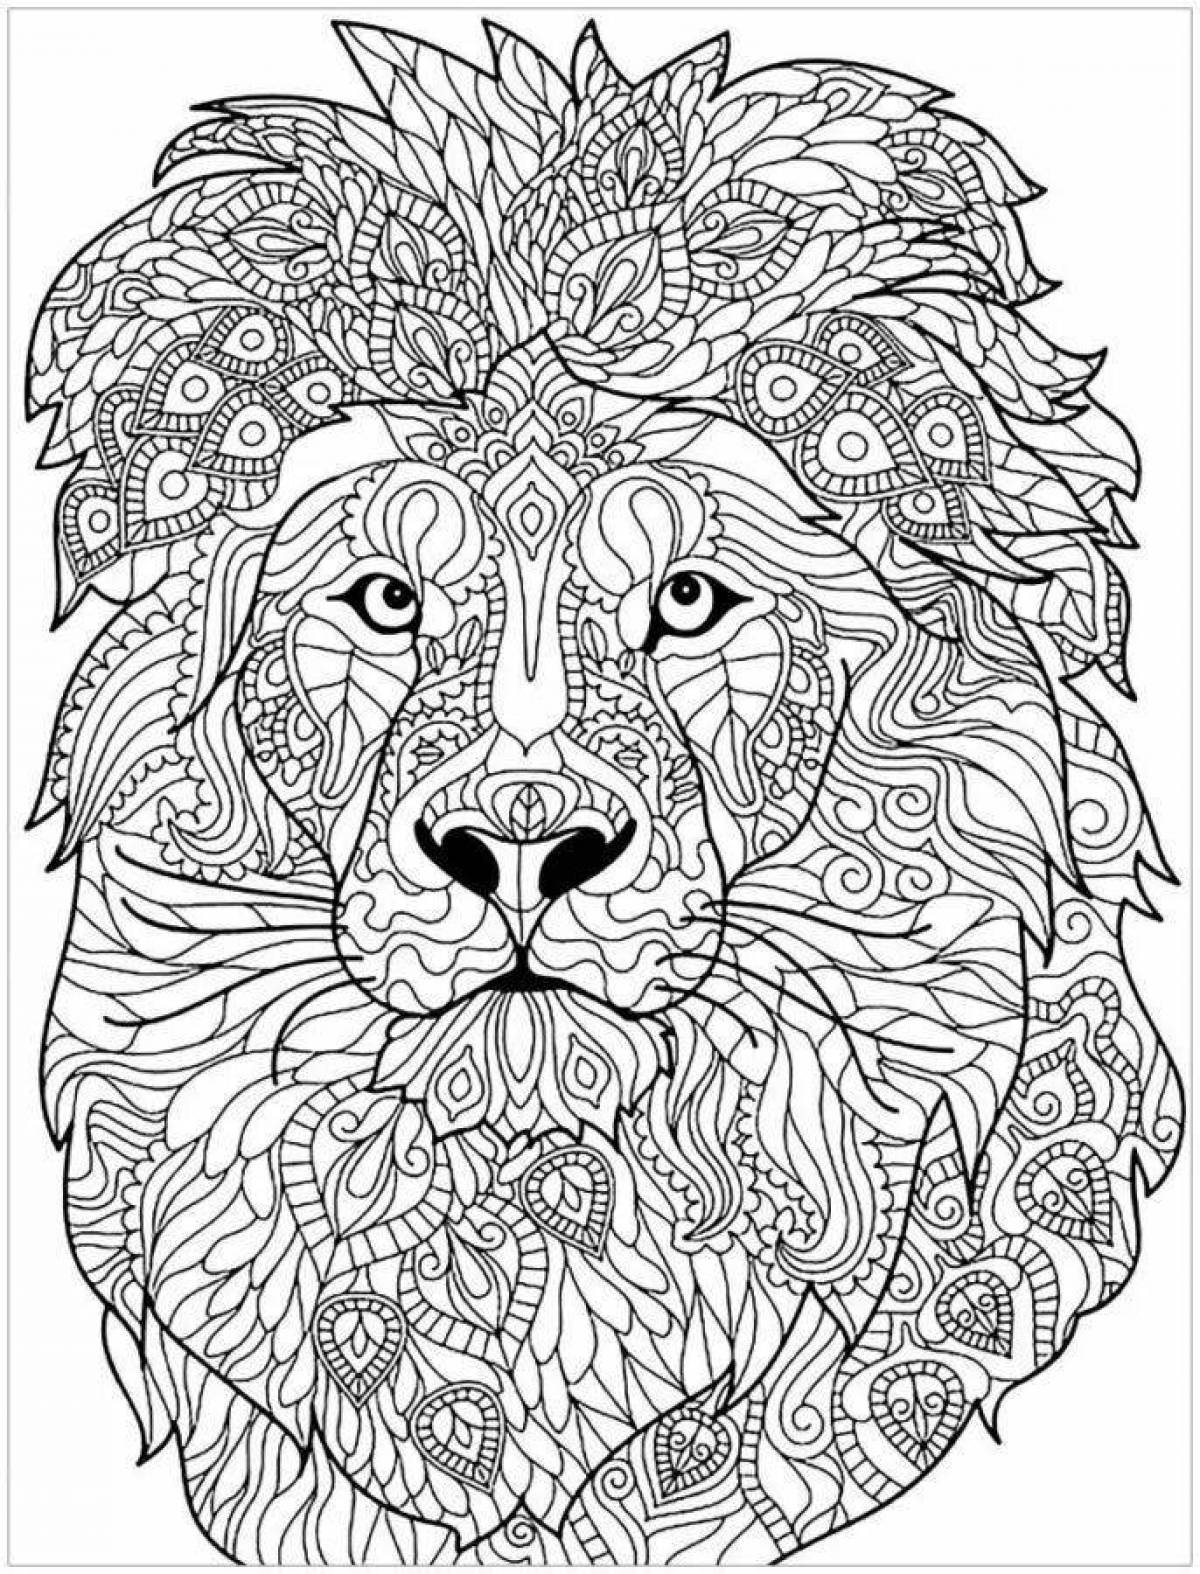 Great coloring book, very beautiful and complex